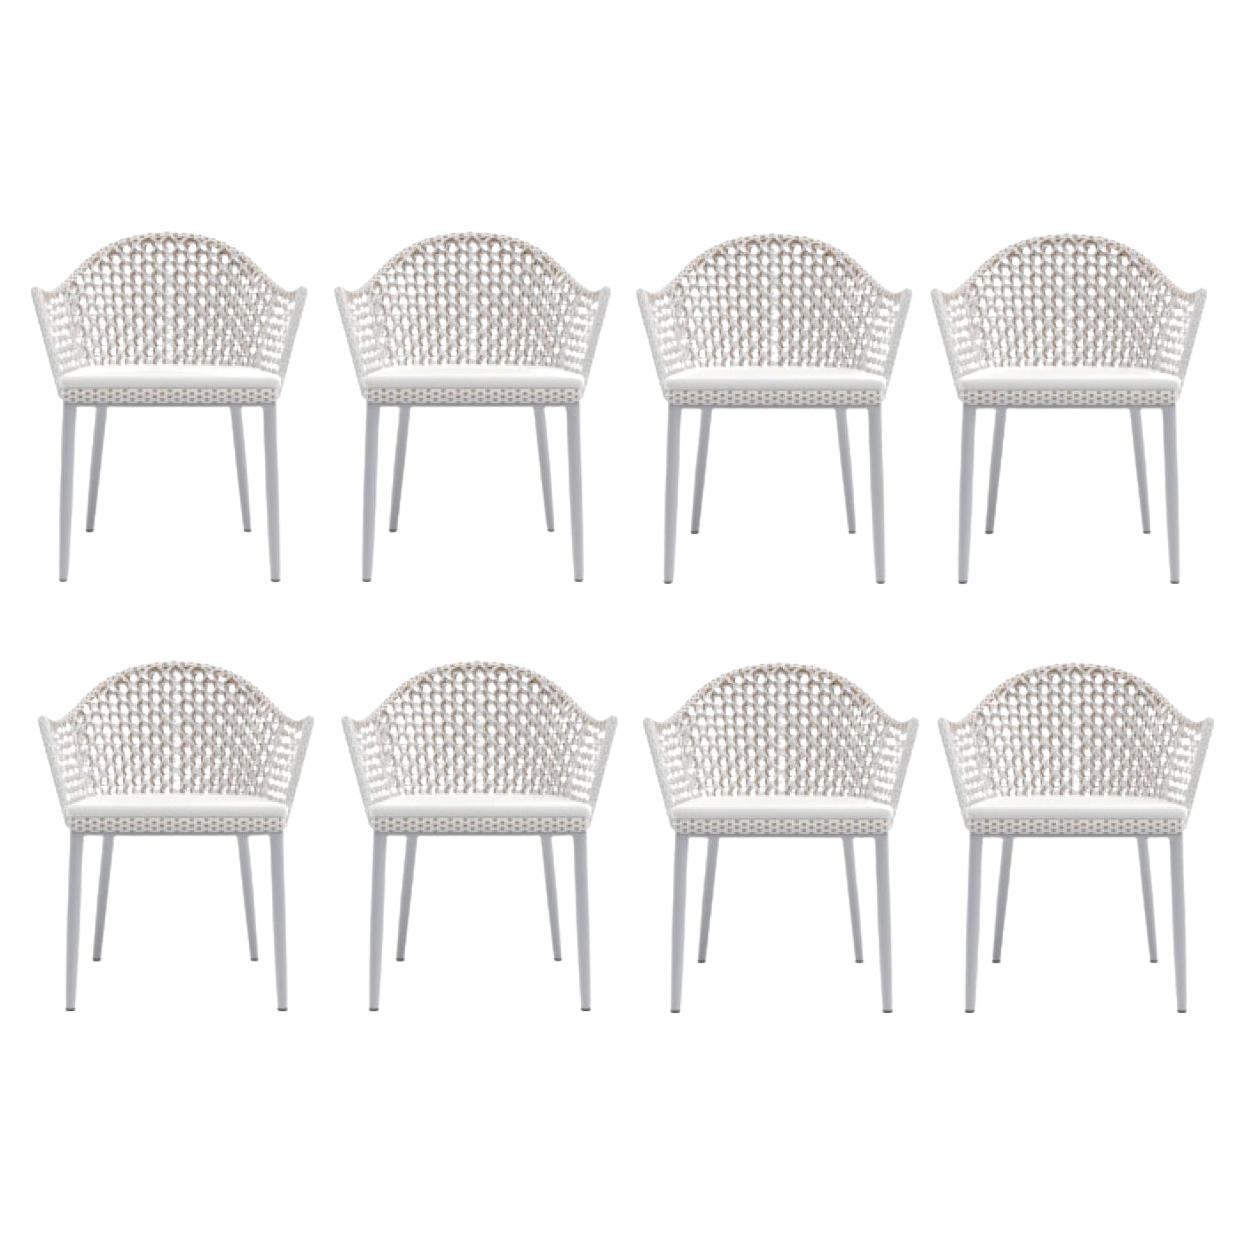 Outdoor Dining Armchairs in Weather Resistant Wicker / Set of 8